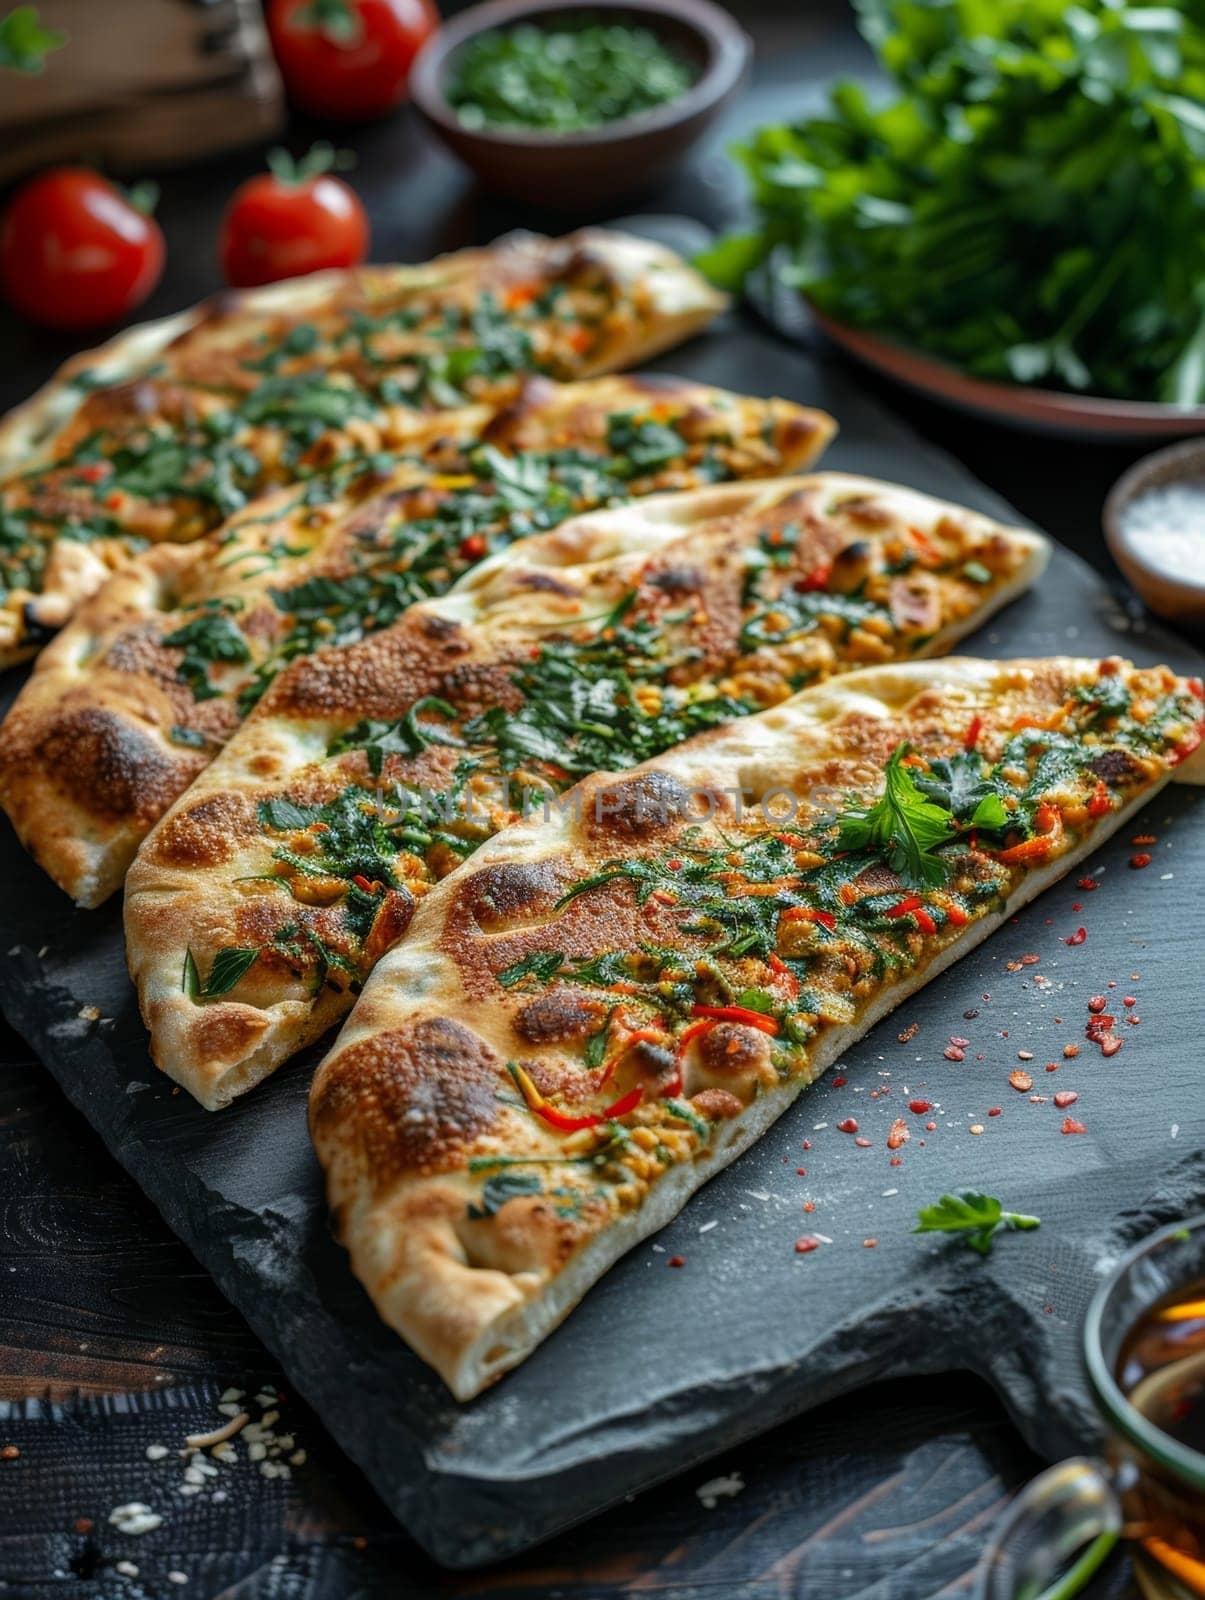 Traditional Azerbaijani qutab, stuffed flatbreads with either greens or minced meat, served on a slate serving board. Hand-crafted and flavorful dish represents the rich culinary heritage of Caucasus